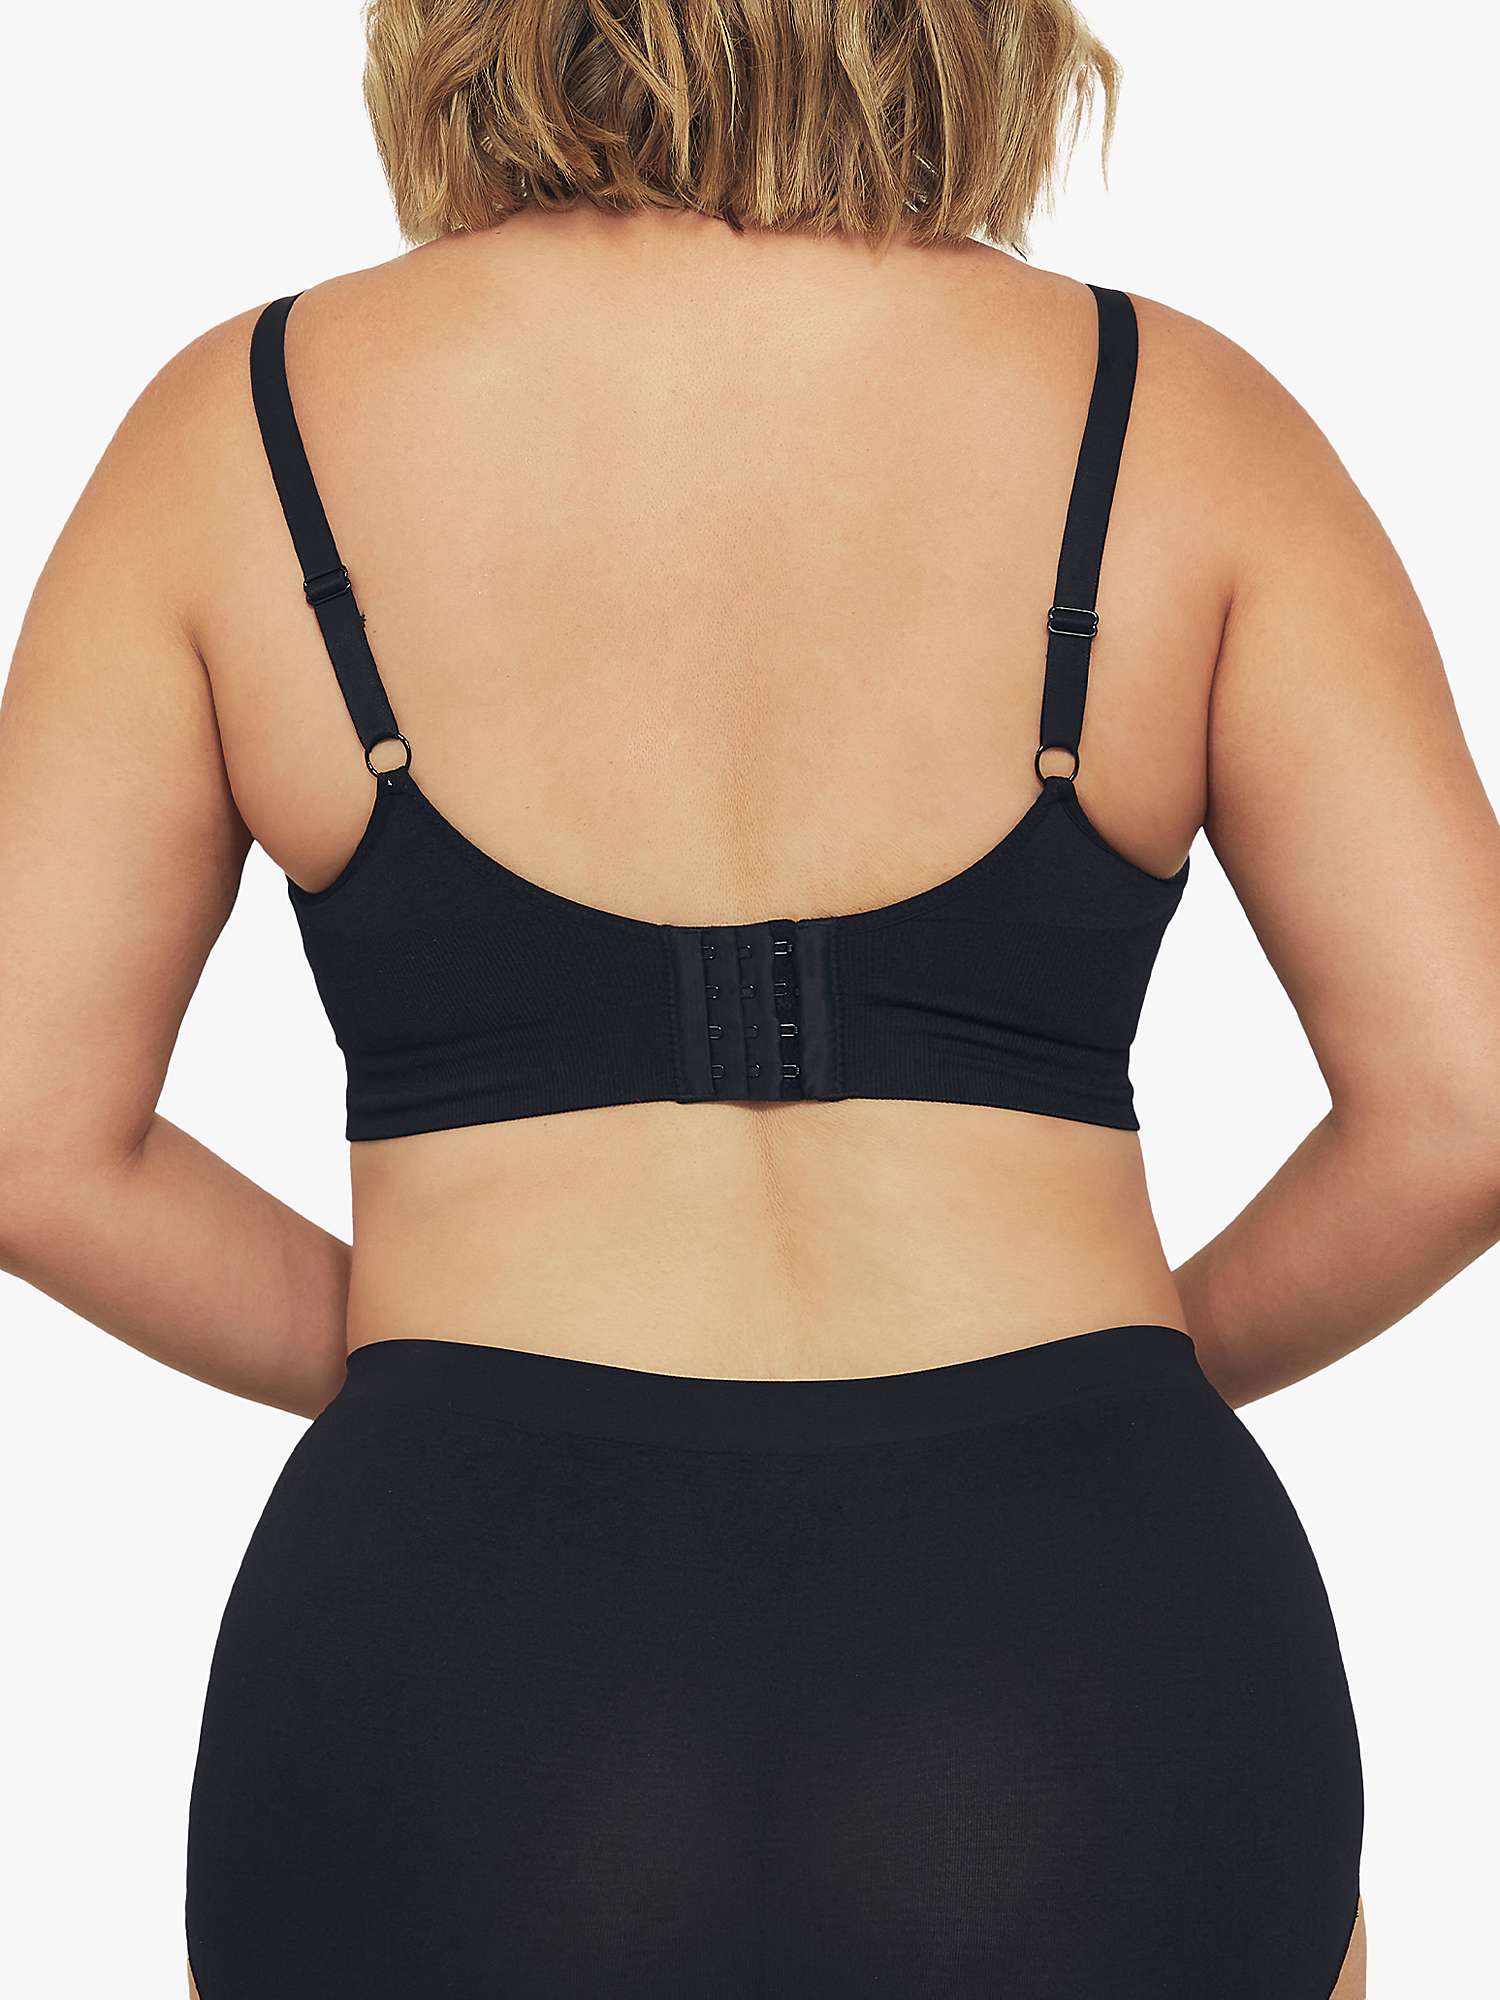 Buy Ambra Curvesque Non Wired Support Bra Online at johnlewis.com